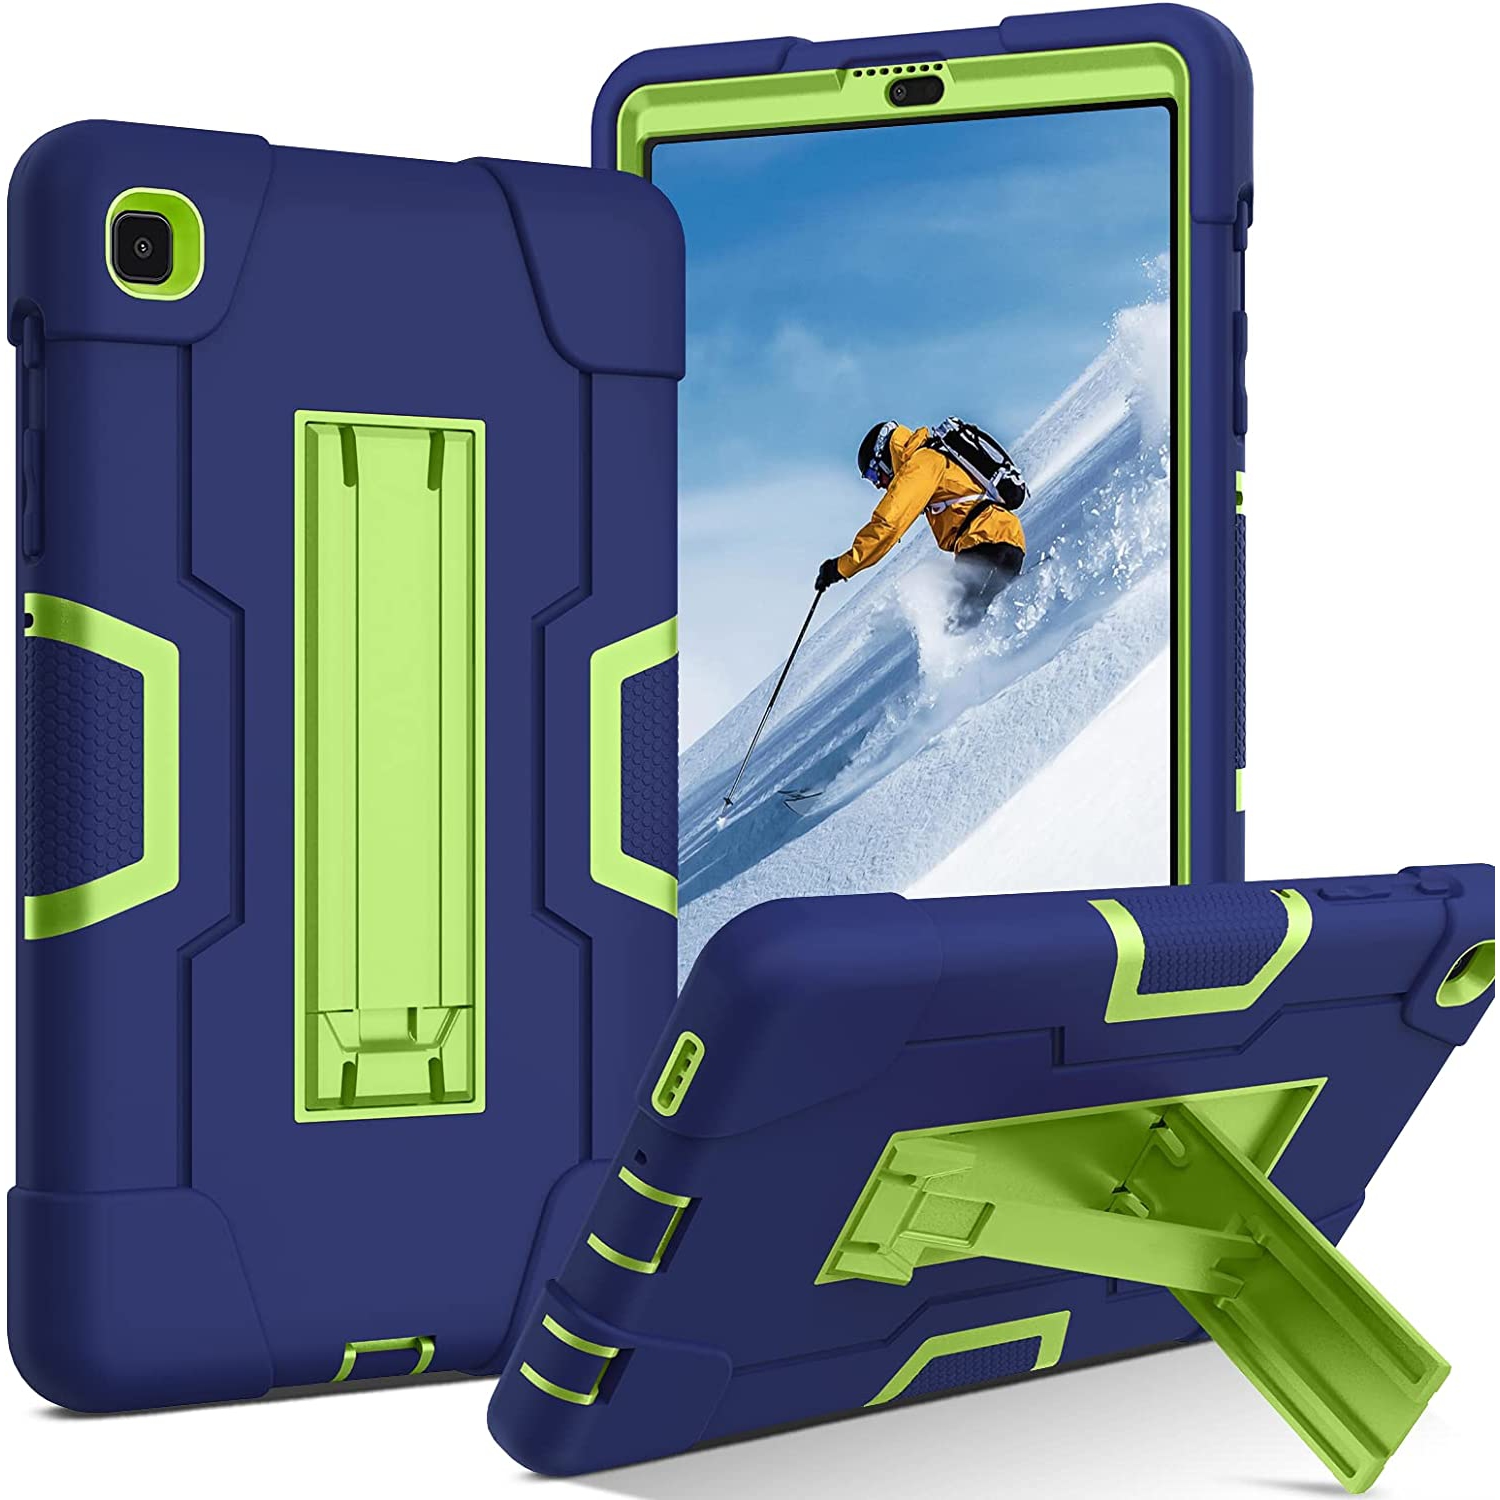 Galaxy Tab A7 Lite 8.7 Case 2021, D Kickstand Shockproof 3 in 1 Heavy Duty Hybrid Hard PC Cover High Impact Full Body Protective Case for Samsung Galaxy Tab A7 Lite 8.7 inch SM-T2